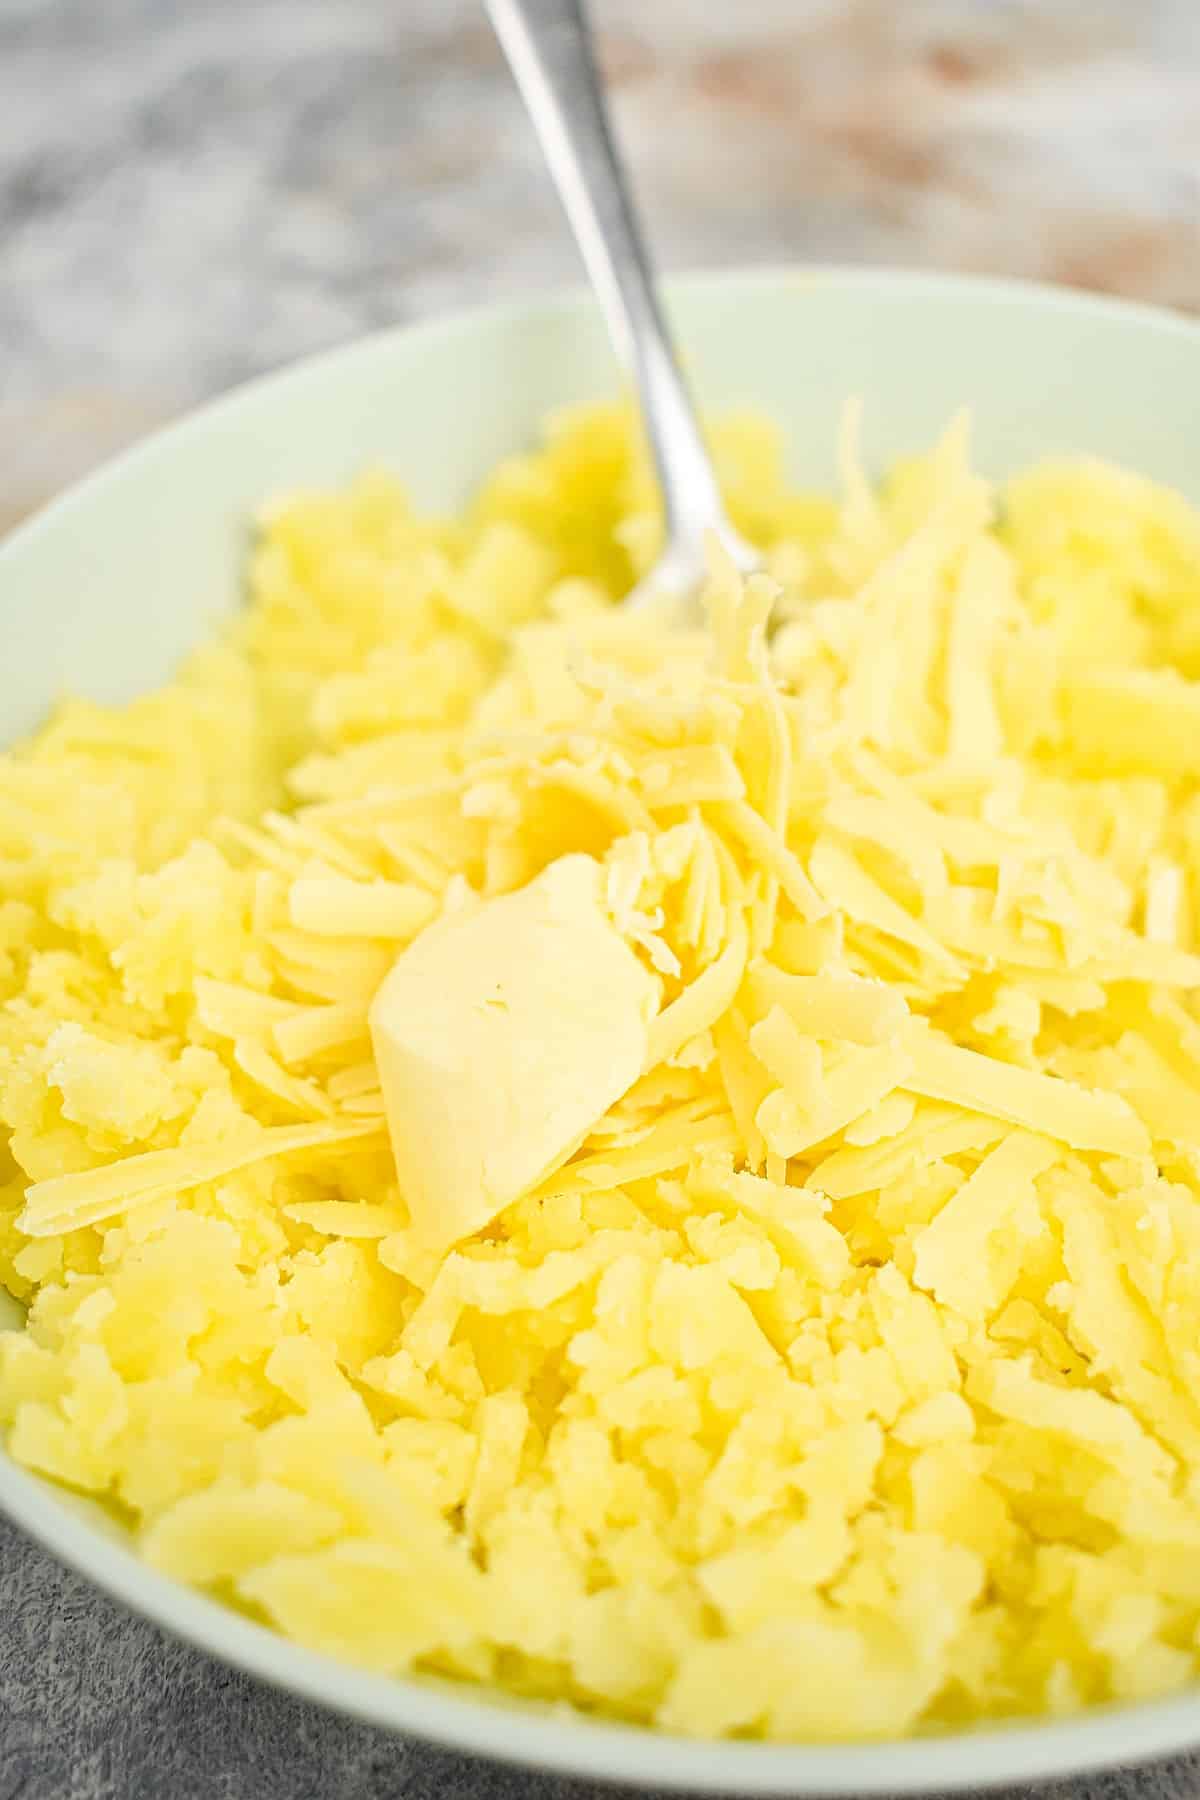 Mashed potatoes with butter and cheese on top.